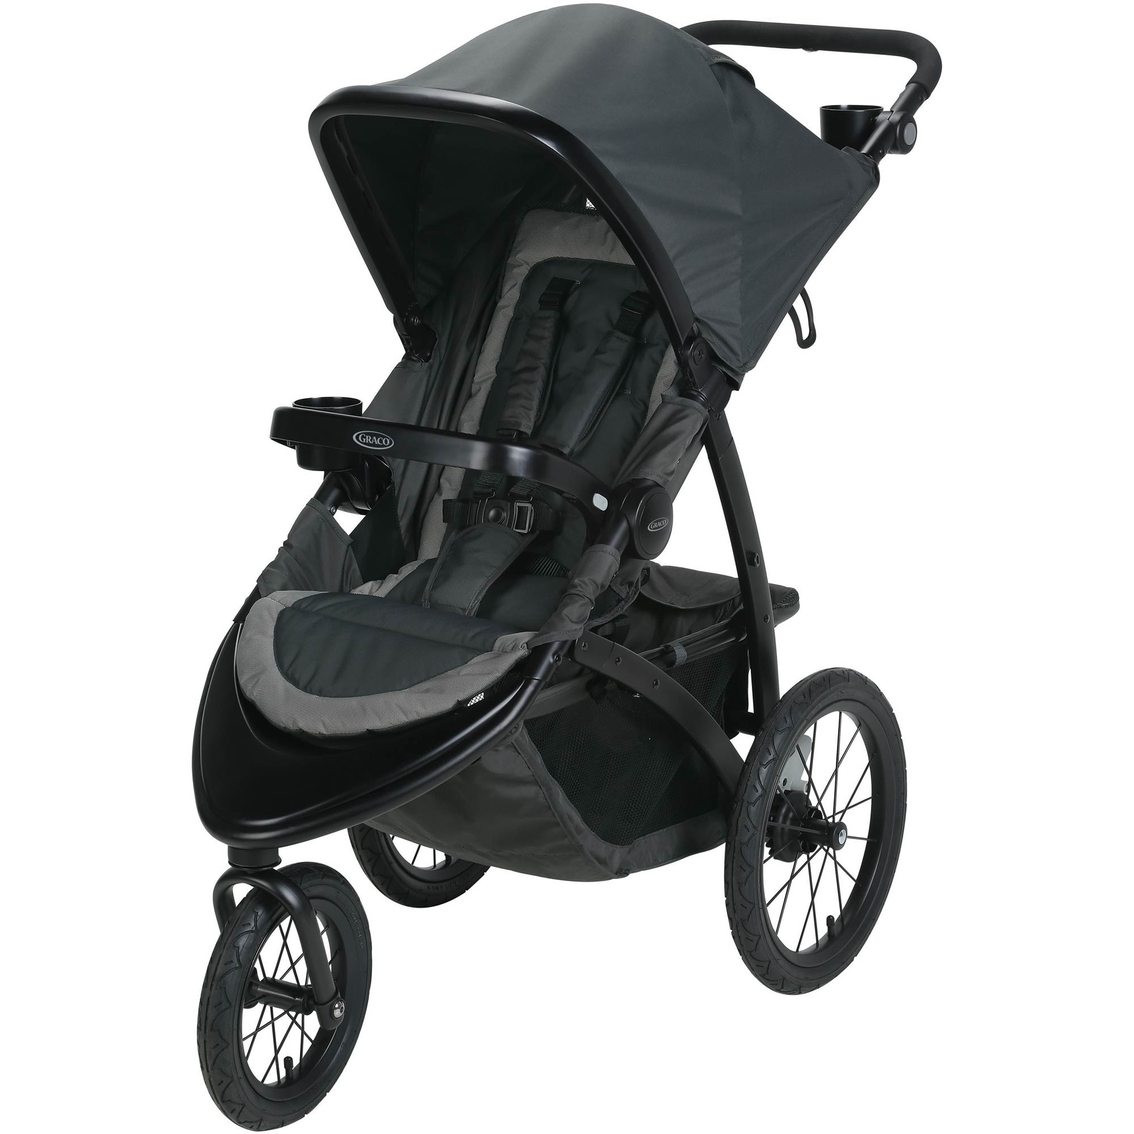 graco jogging stroller yellow and black